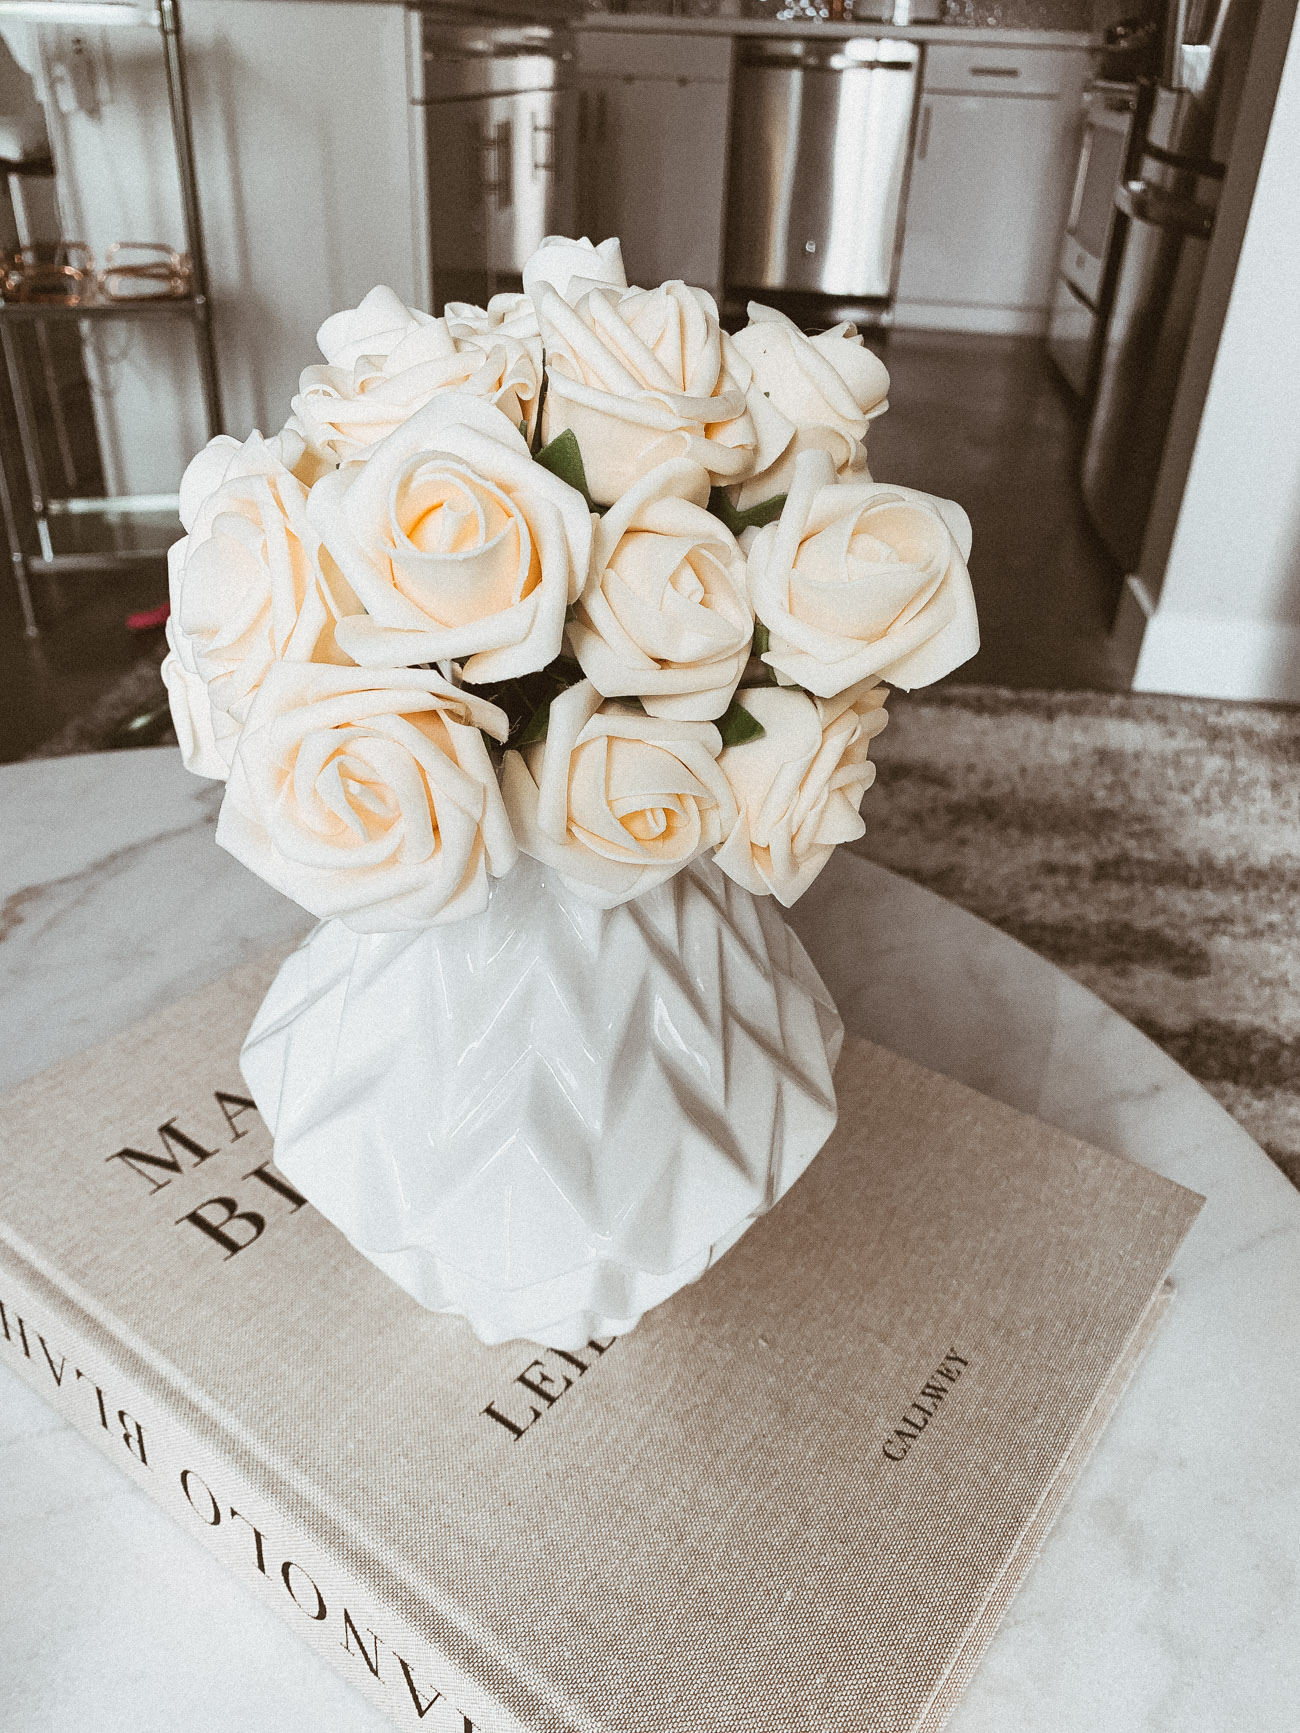 Faux Flowers for Decor | House Flowers | Blondie in the City by Hayley Larue